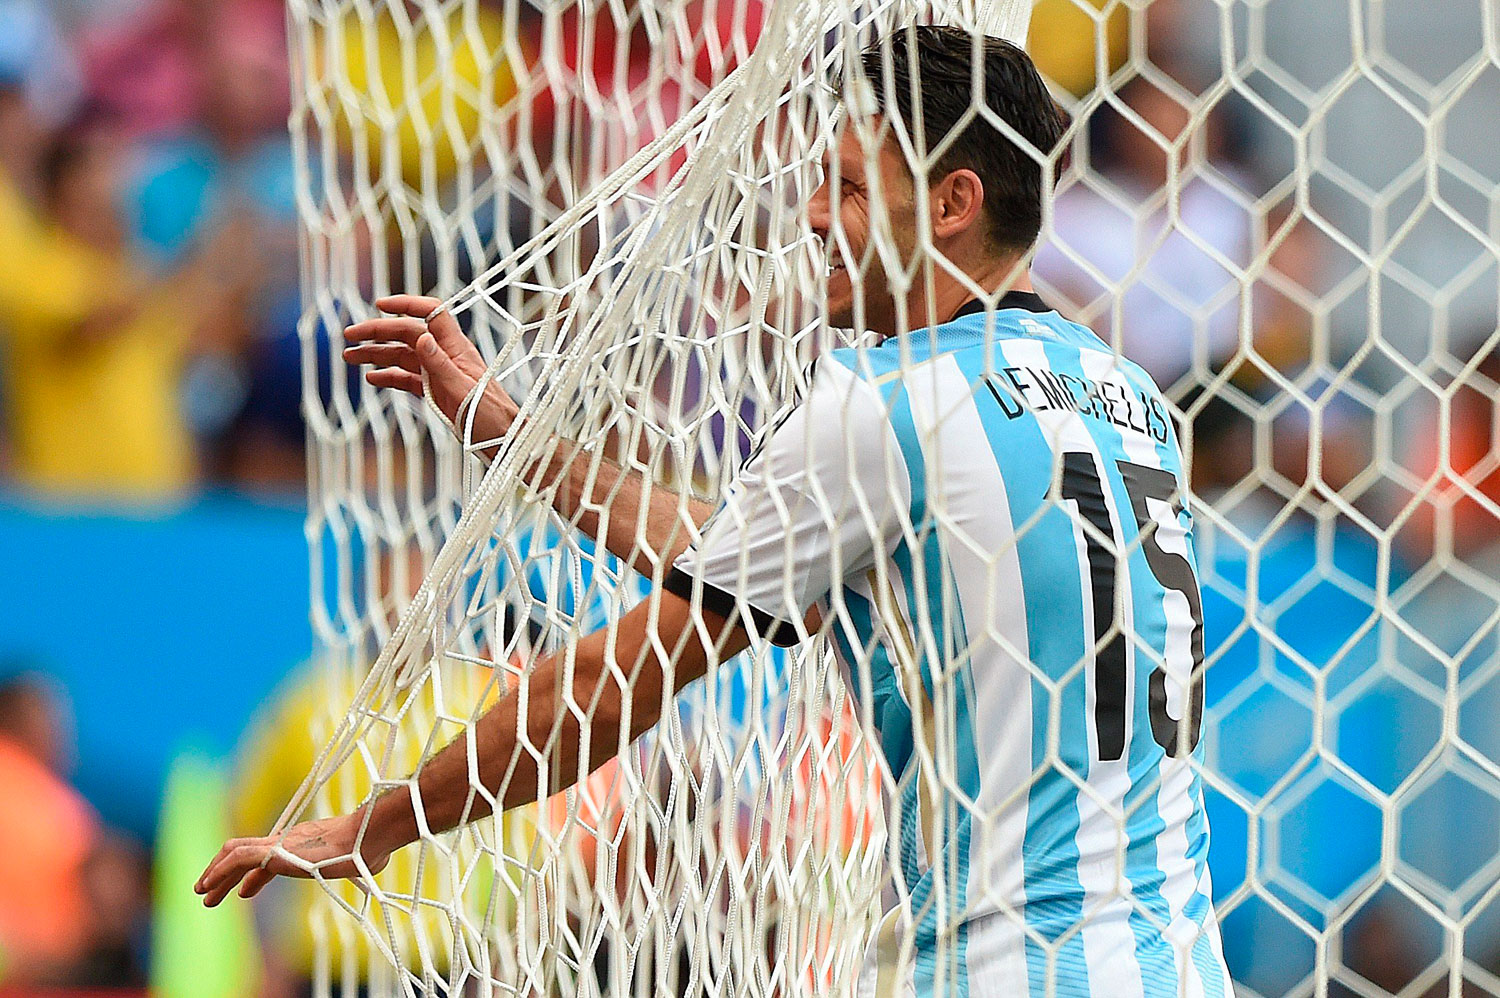 Argentina's defender Martin Demichelis stands in the nets during a quarter-final football match between Argentina and Belgium at the Mane Garrincha National Stadium in Brasilia, Brazil on July 5, 2014.